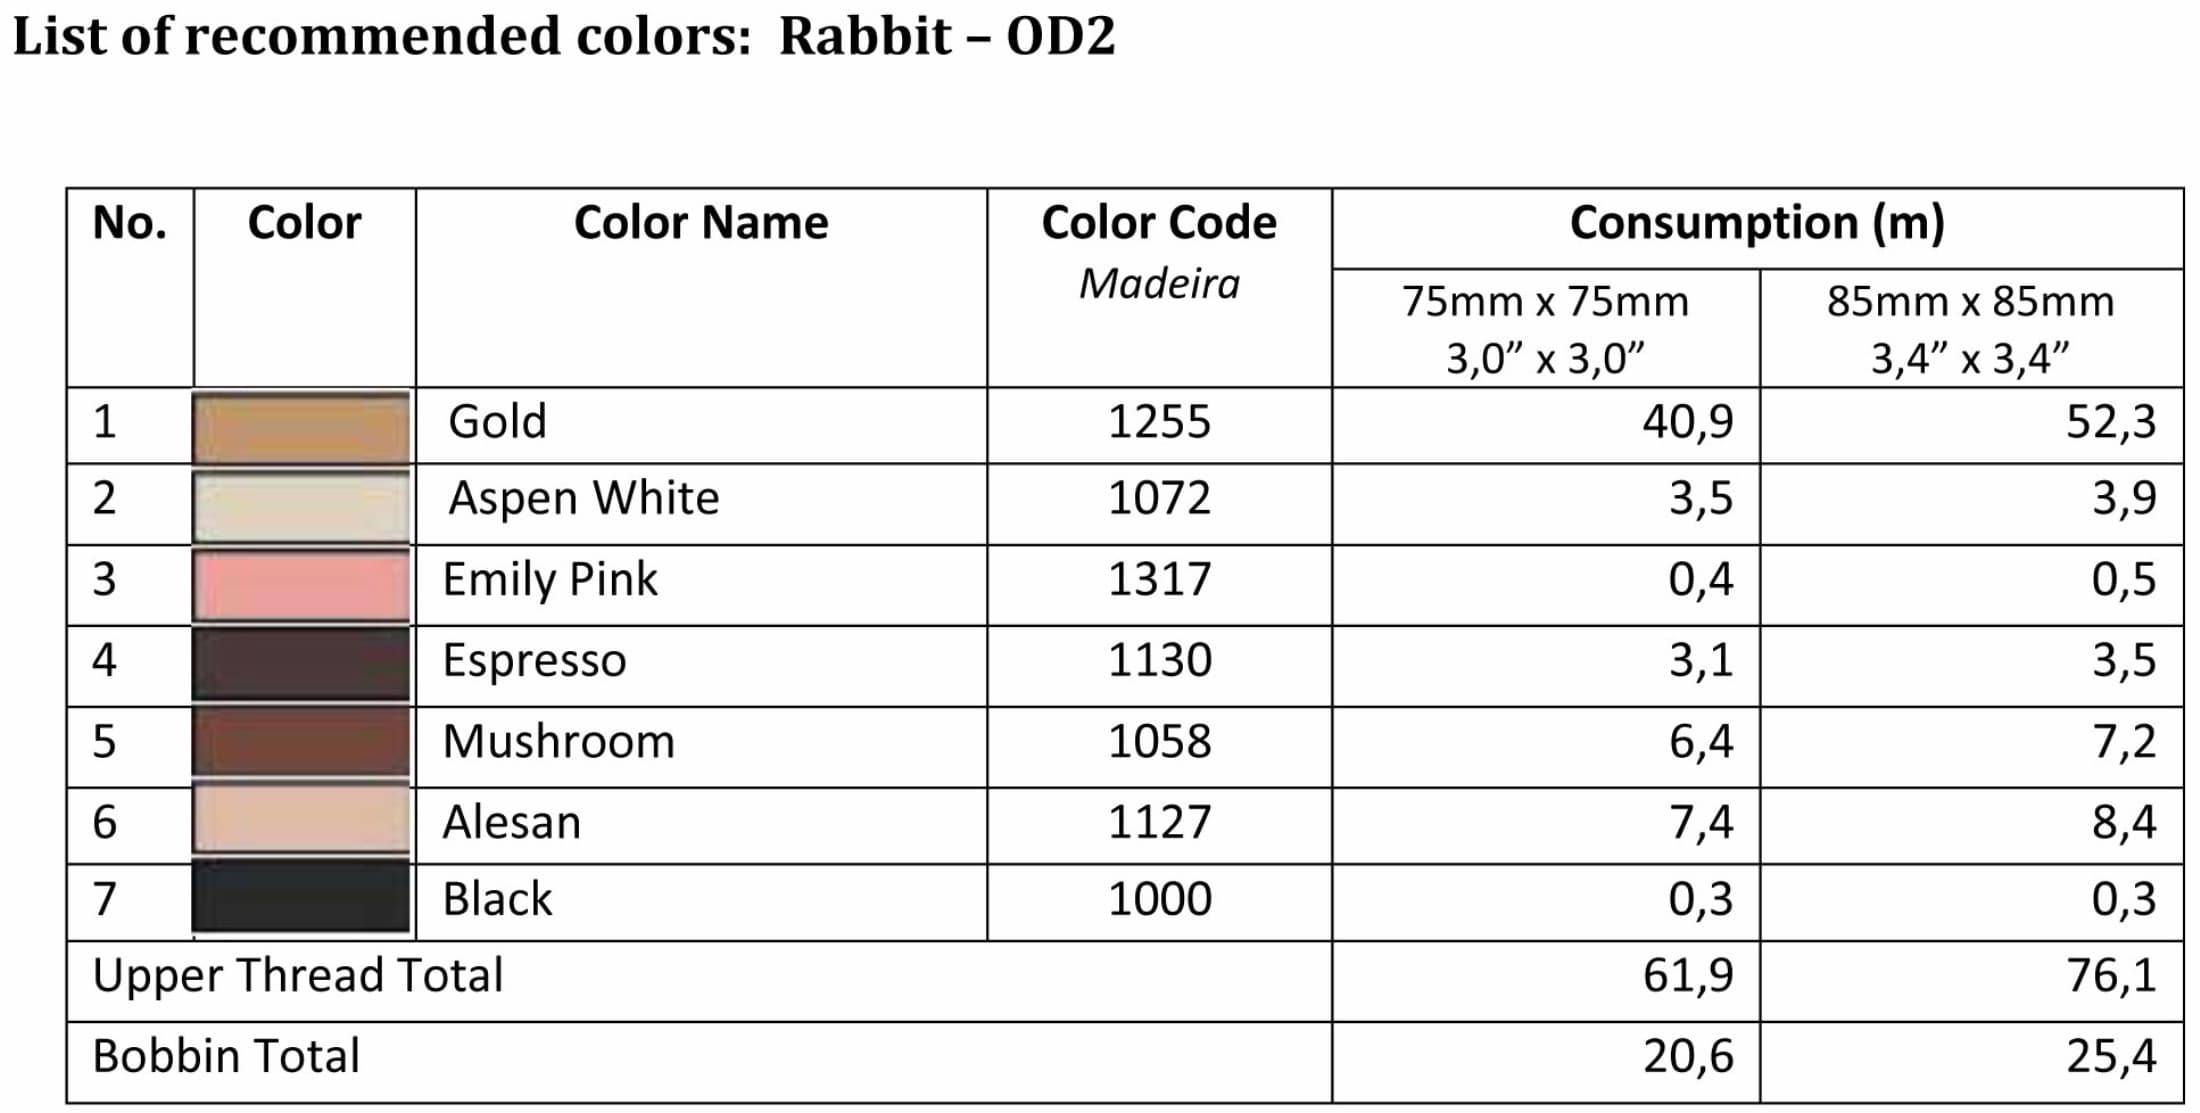 List of recommended colors - OD2